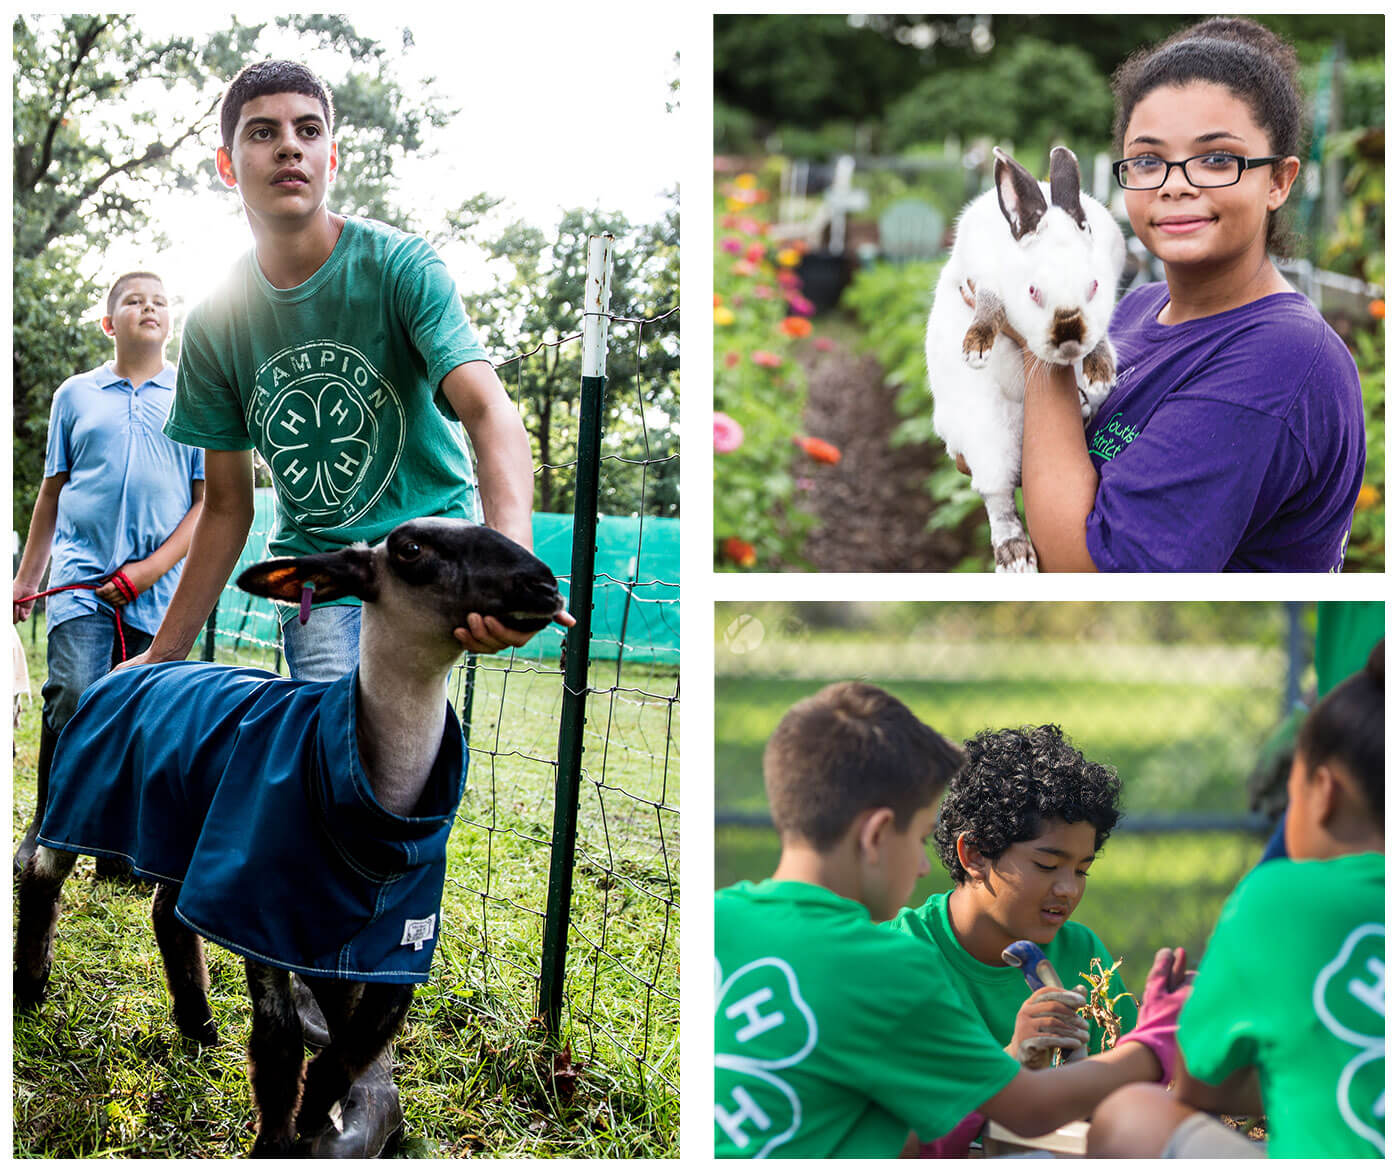 Three pictures of various 4-h students. In photo 1, two kids are helping a goat. In photo 2, a girl is holding a bunny. In photo 3, three kids are doing an outdoor activity.